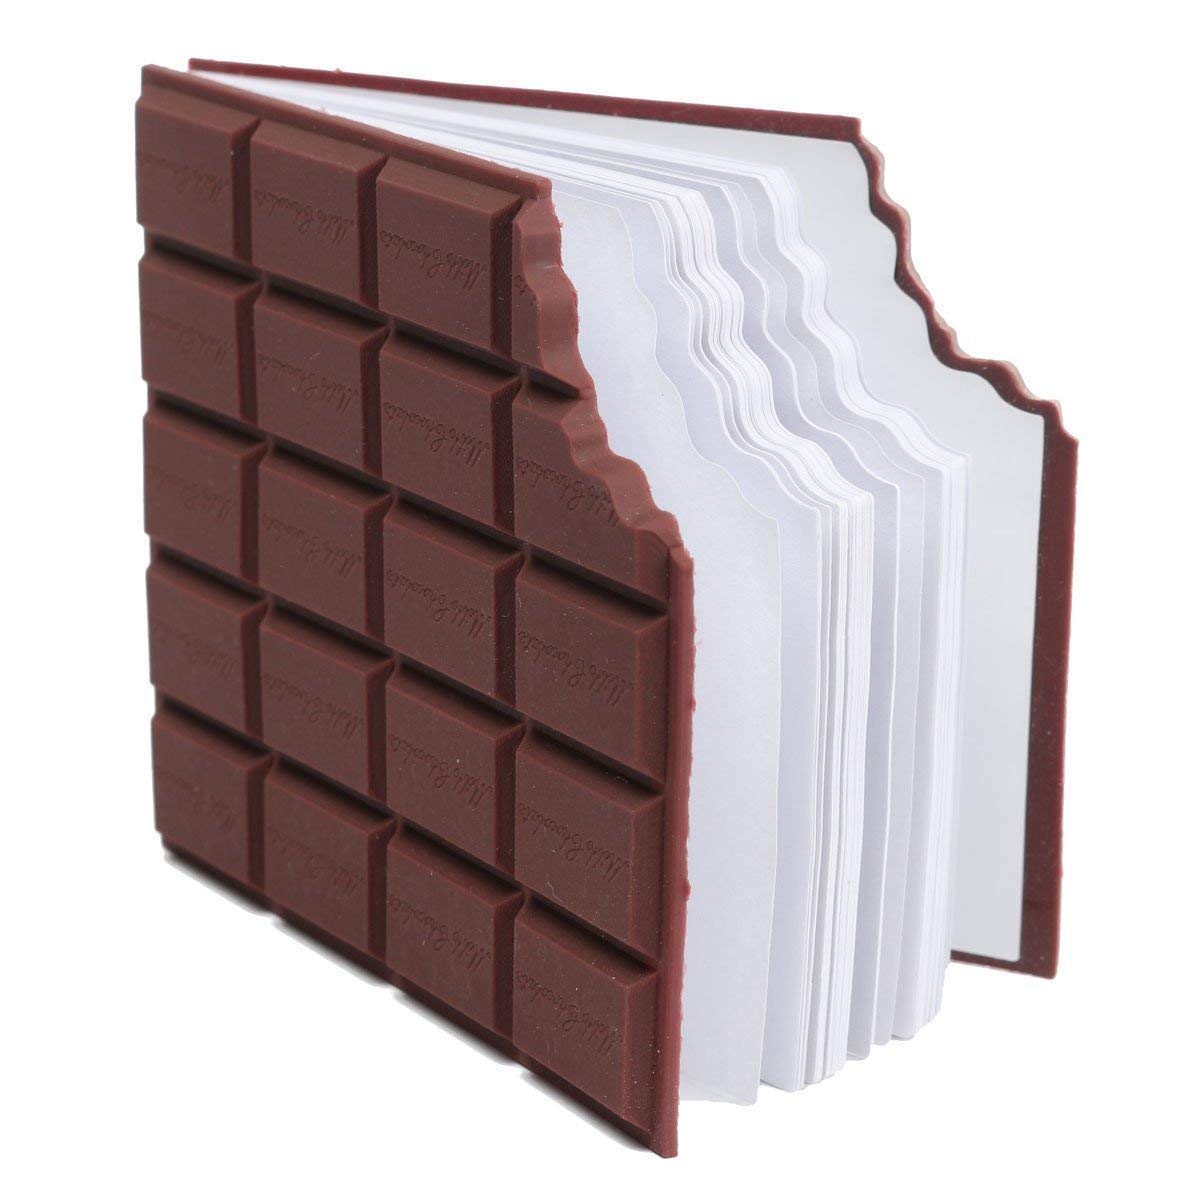 Chocolate Shaped Personal Desk Notepad Memo Book Small Diary (Brown) It